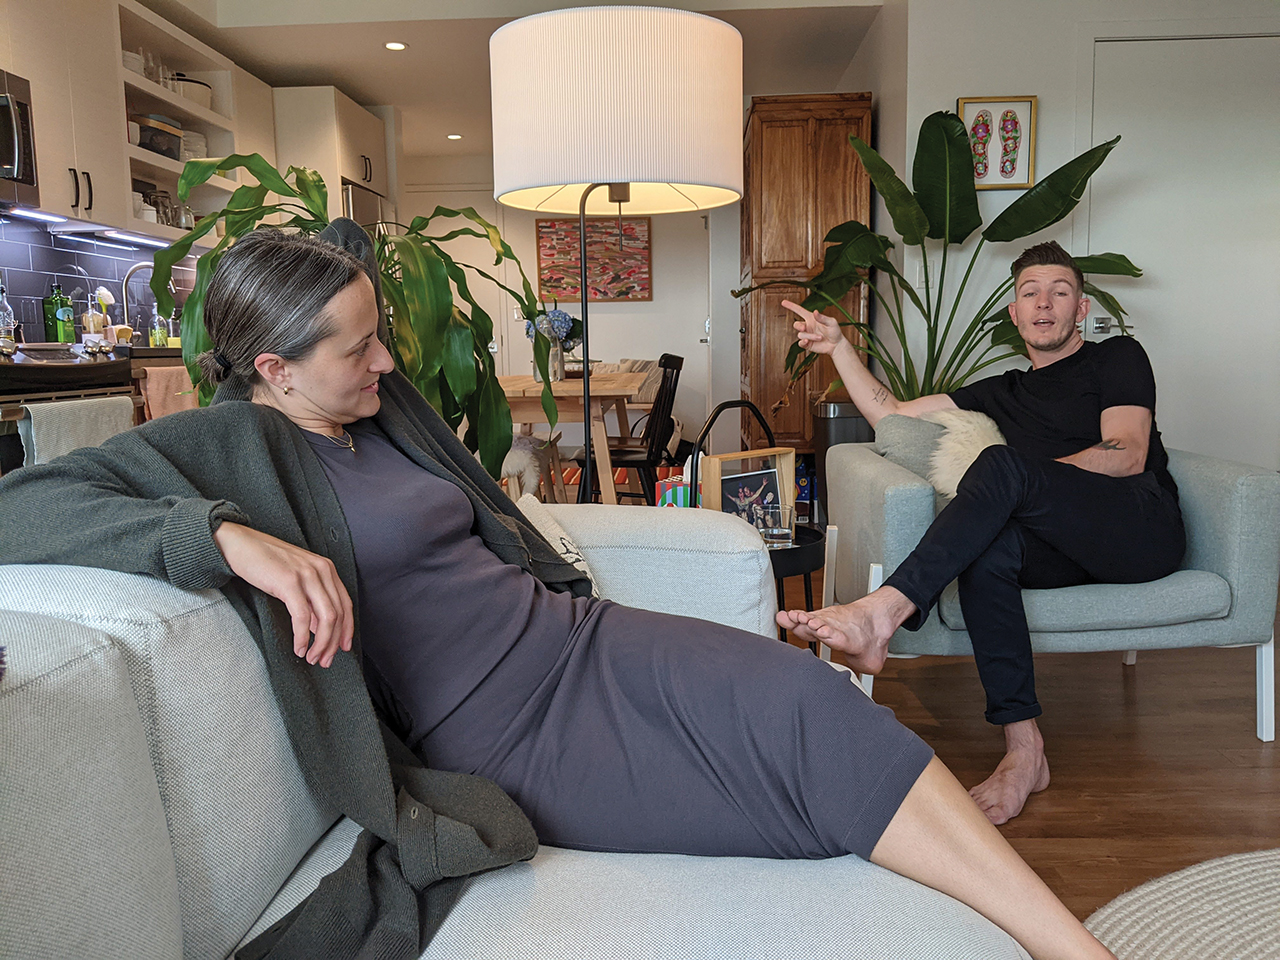 Xiaobei and Jacques tell the story of their relationship from their apartment living room.